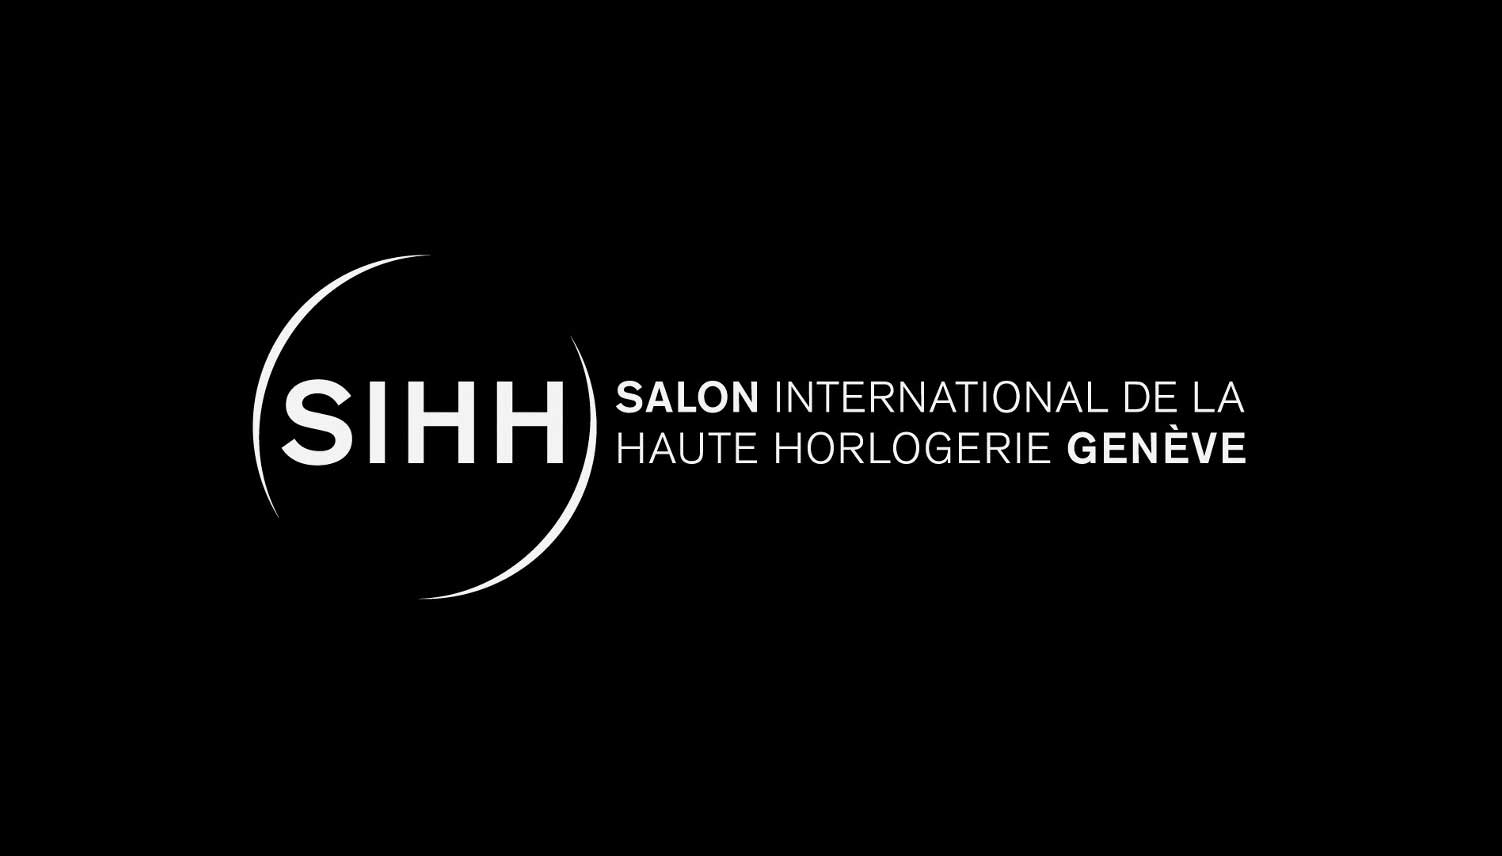 Original image from SIHH